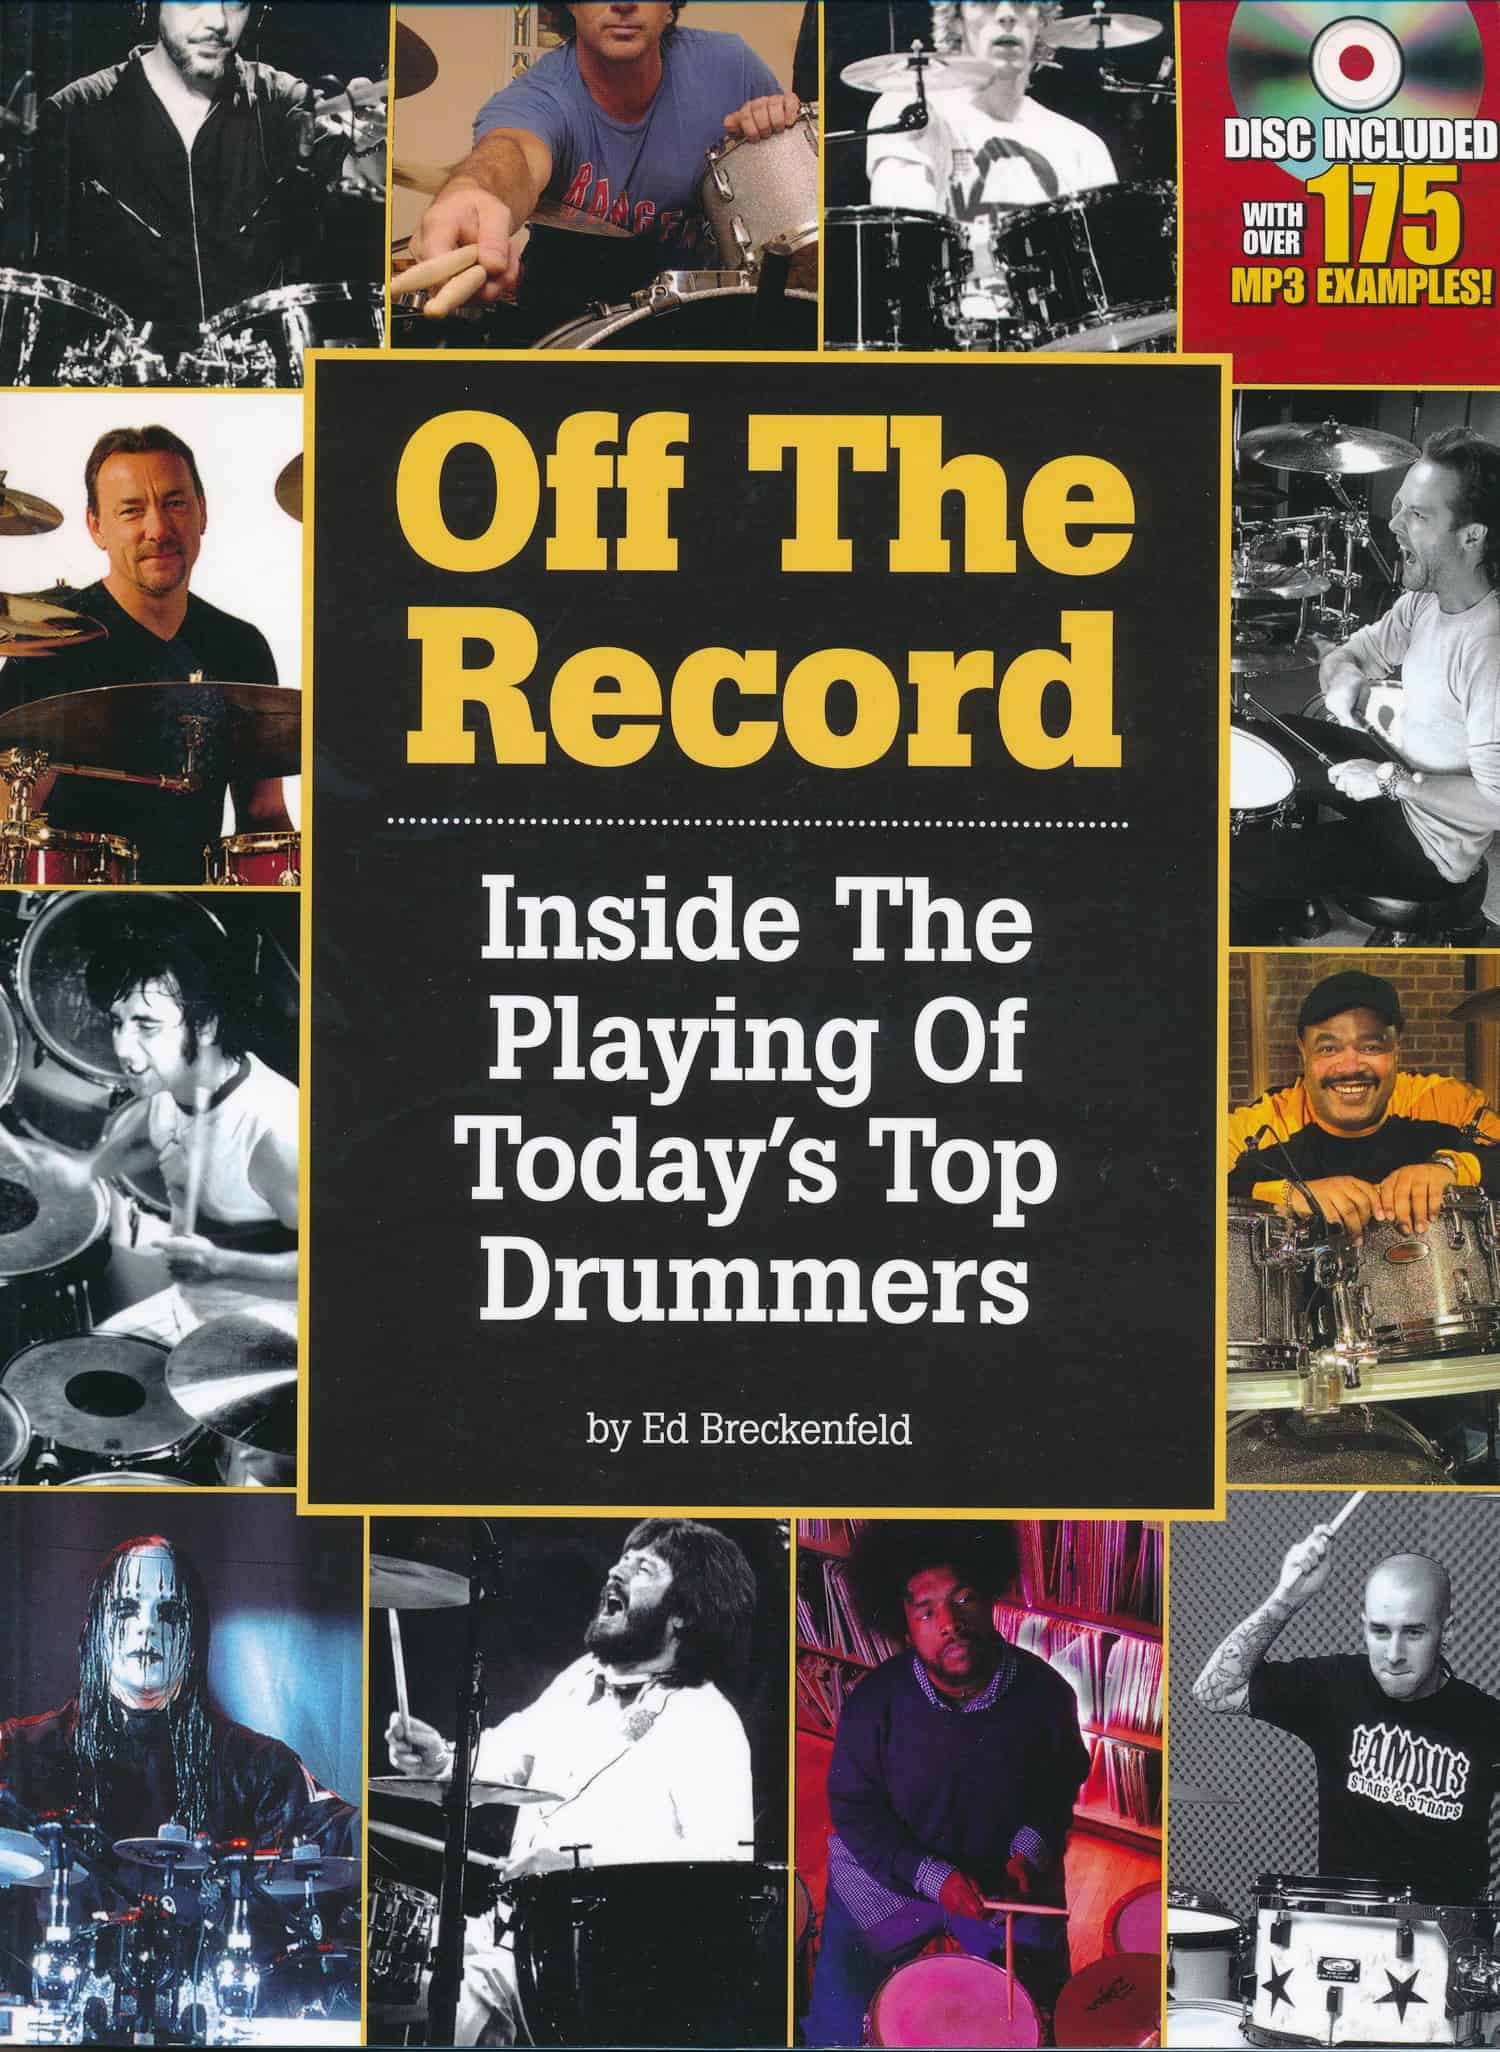 Off The Record - Inside the Playing of Today's Top Drummers